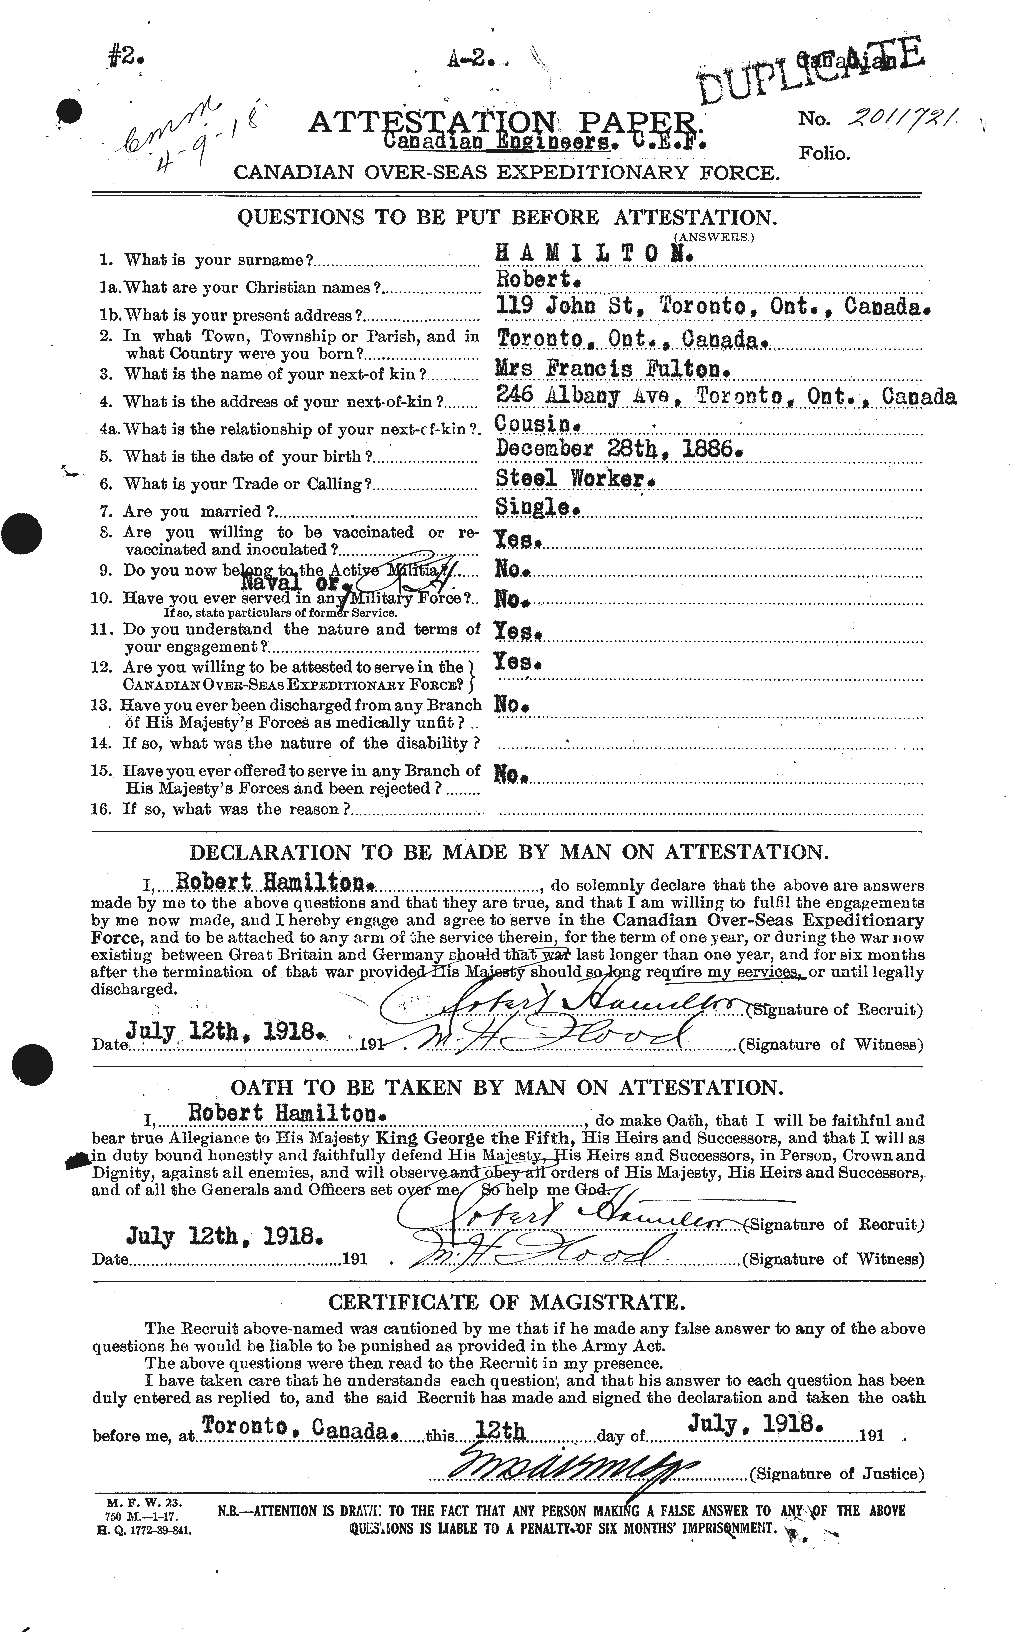 Personnel Records of the First World War - CEF 373225a